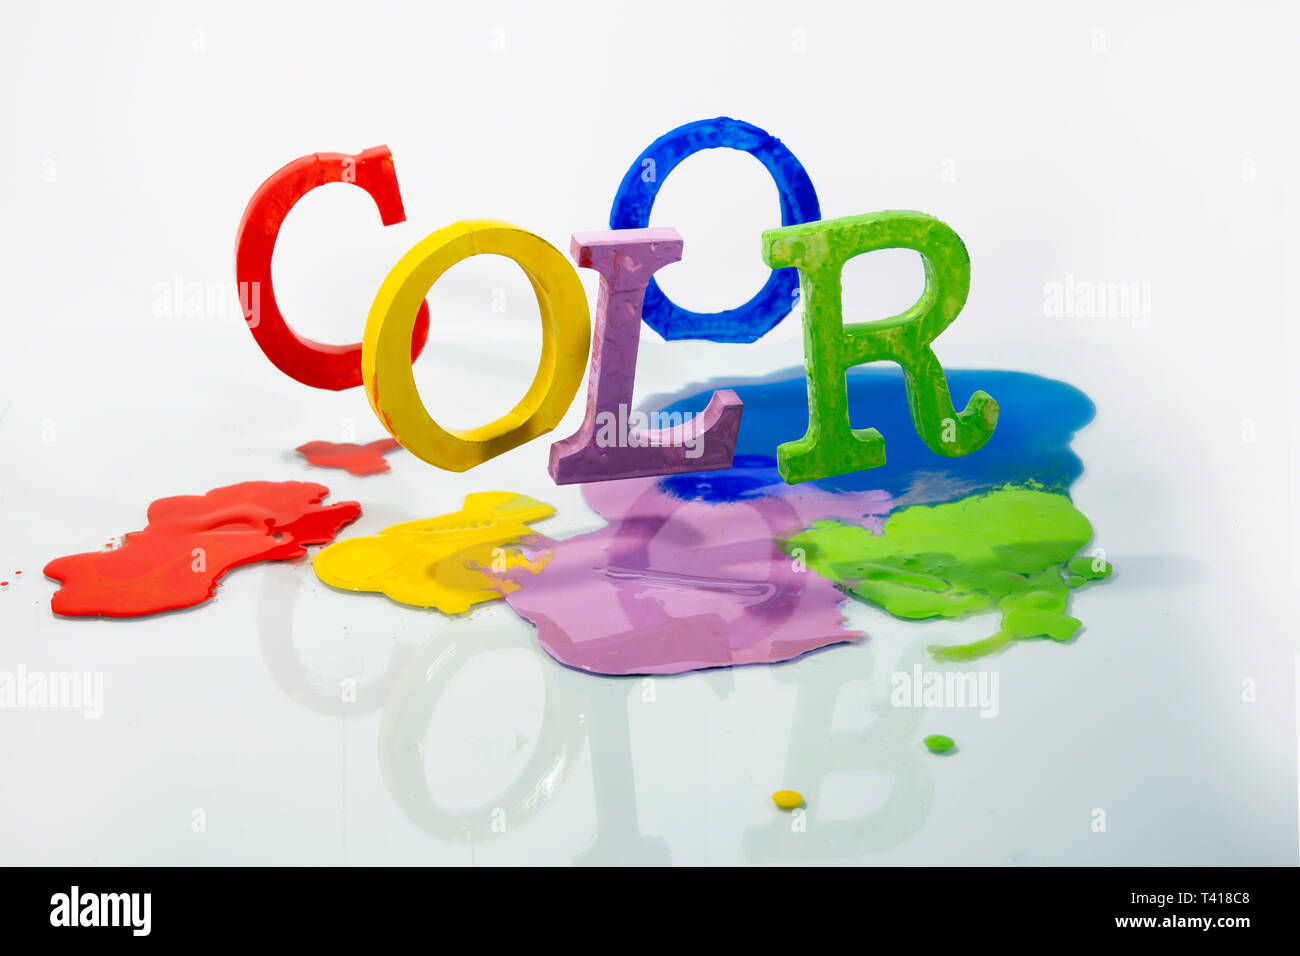 Word Color spelled out using multi coloured capital letters Stock Photo